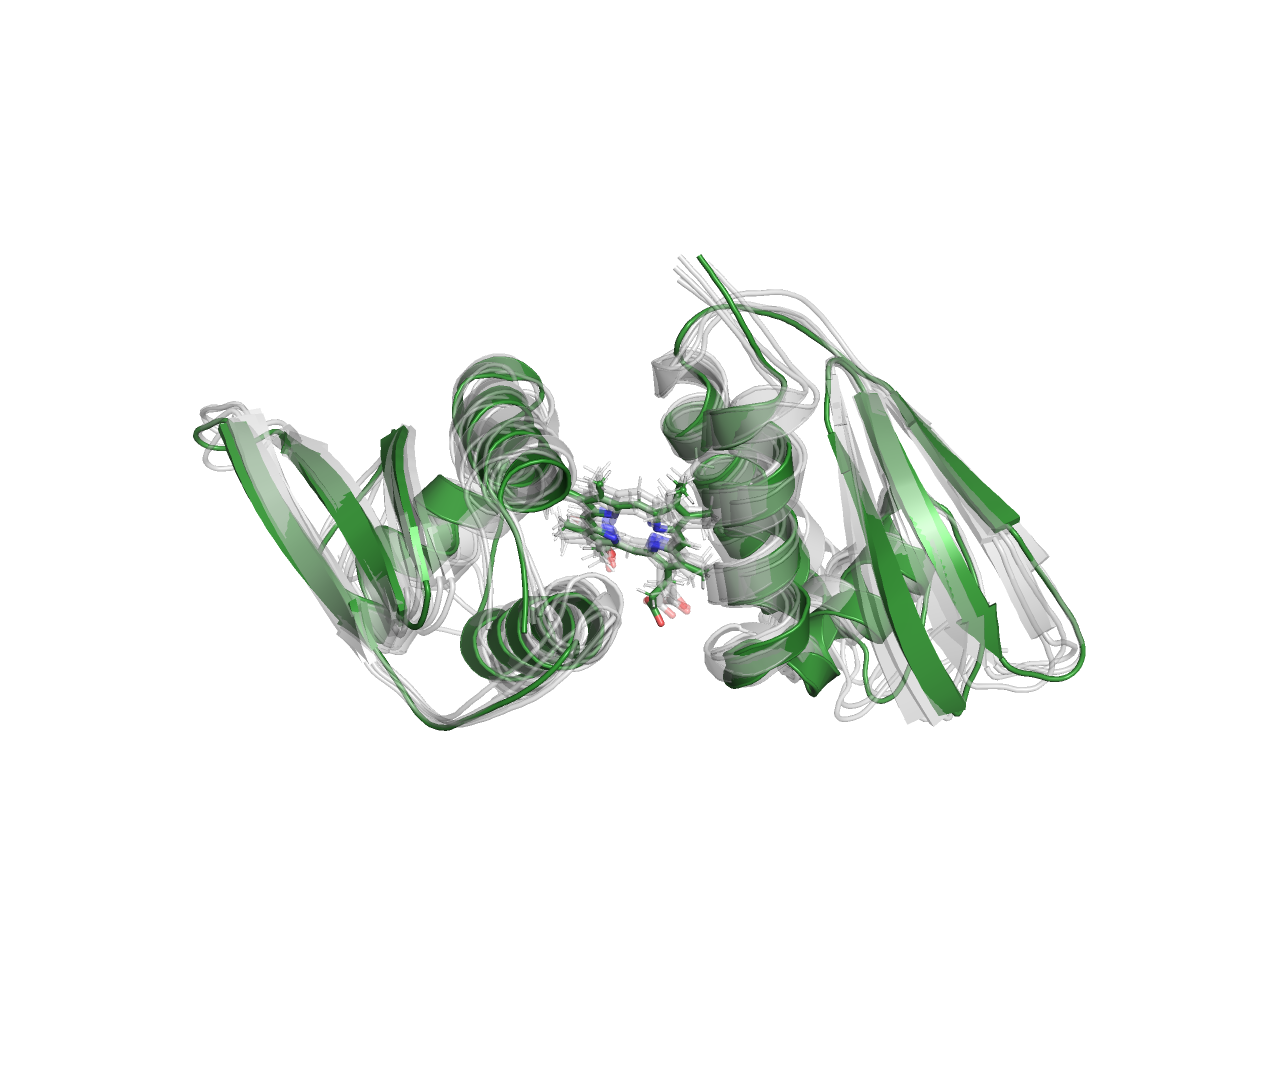 Ssr1698 protein OTHER [STATIC IMAGE] model